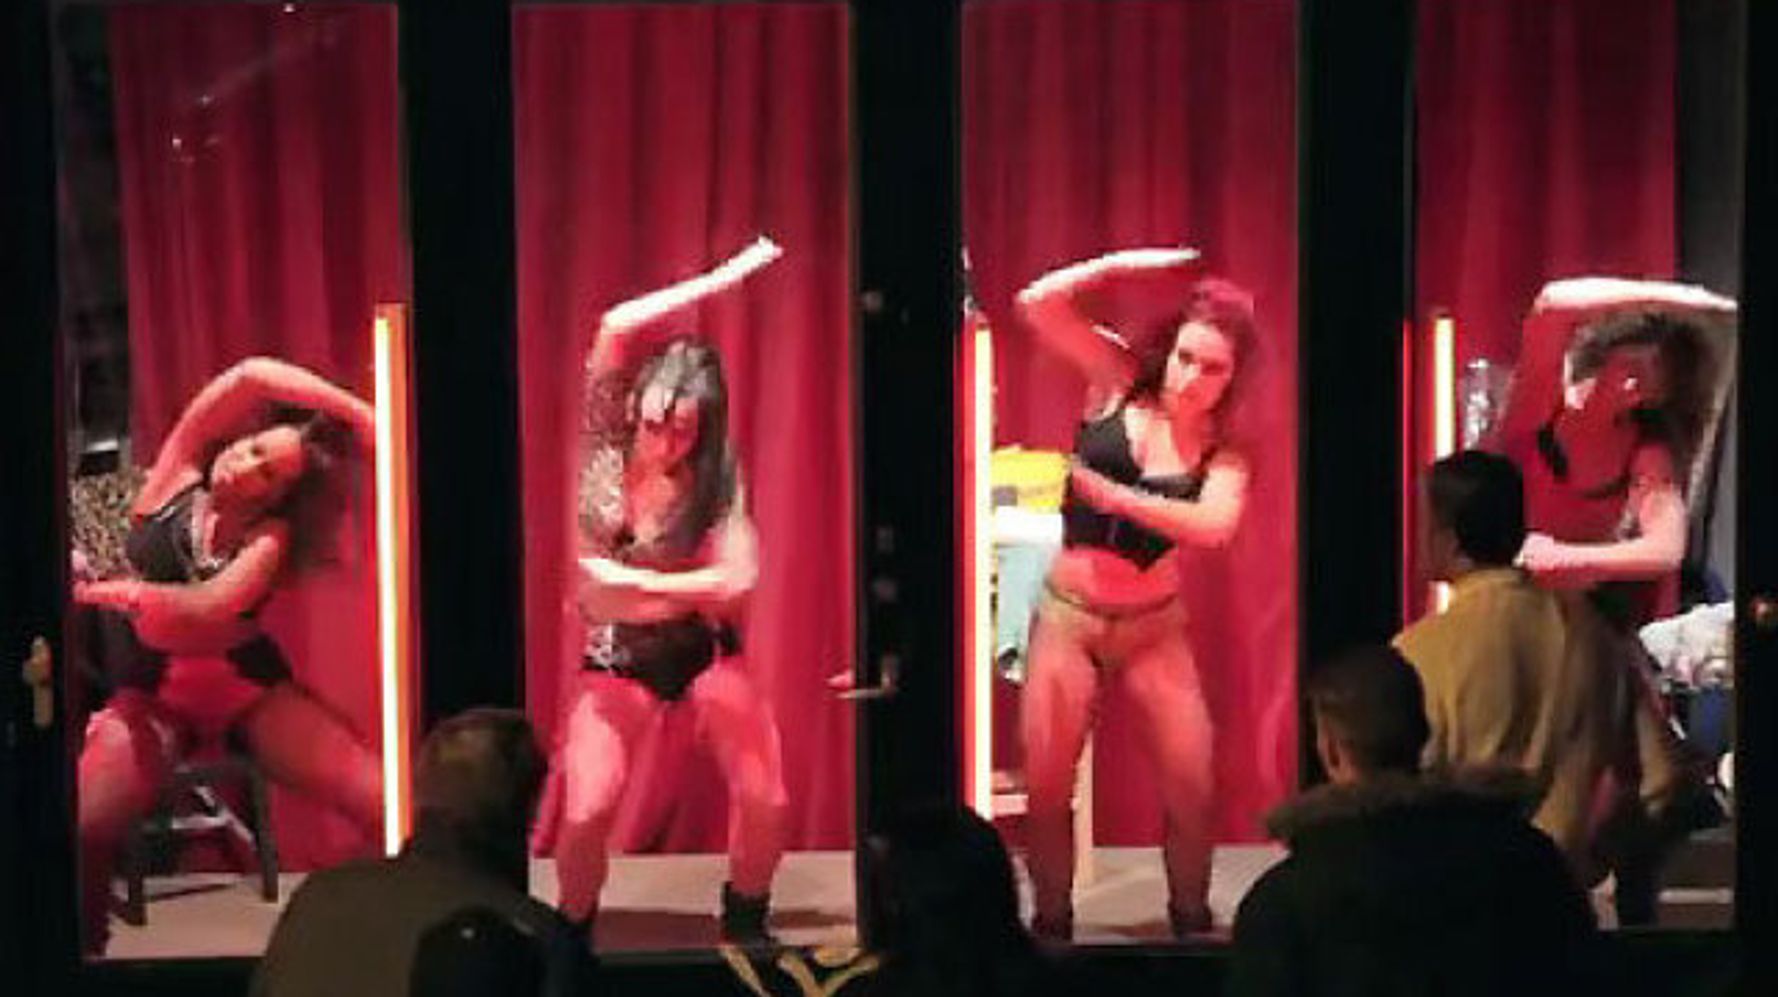 Stop the Traffik's Video Shows Girls Going Wild in the Red Light District News